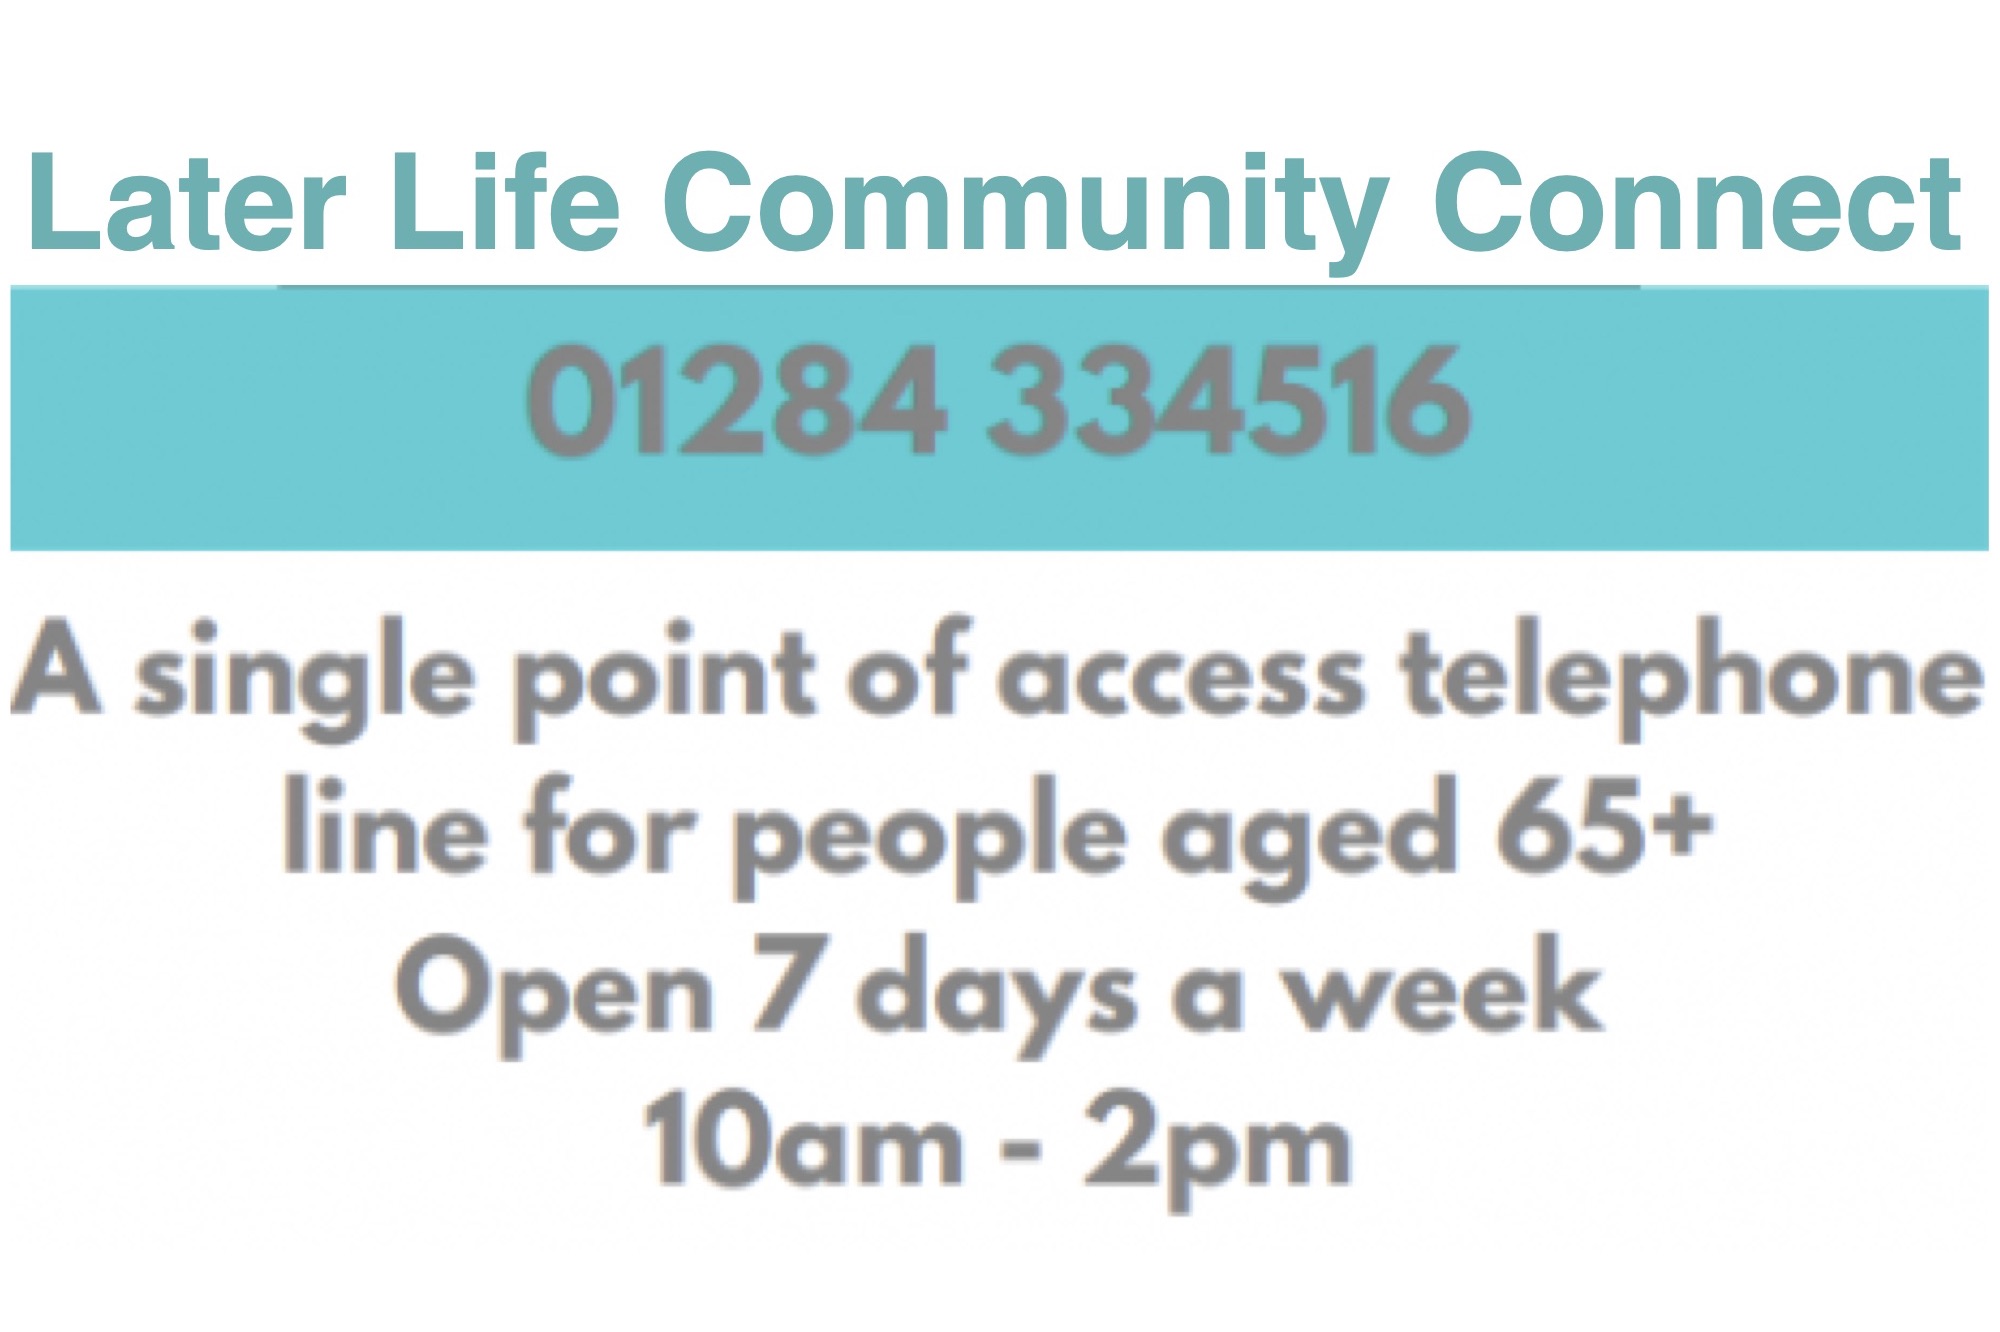 Later Life Community Connect helpline